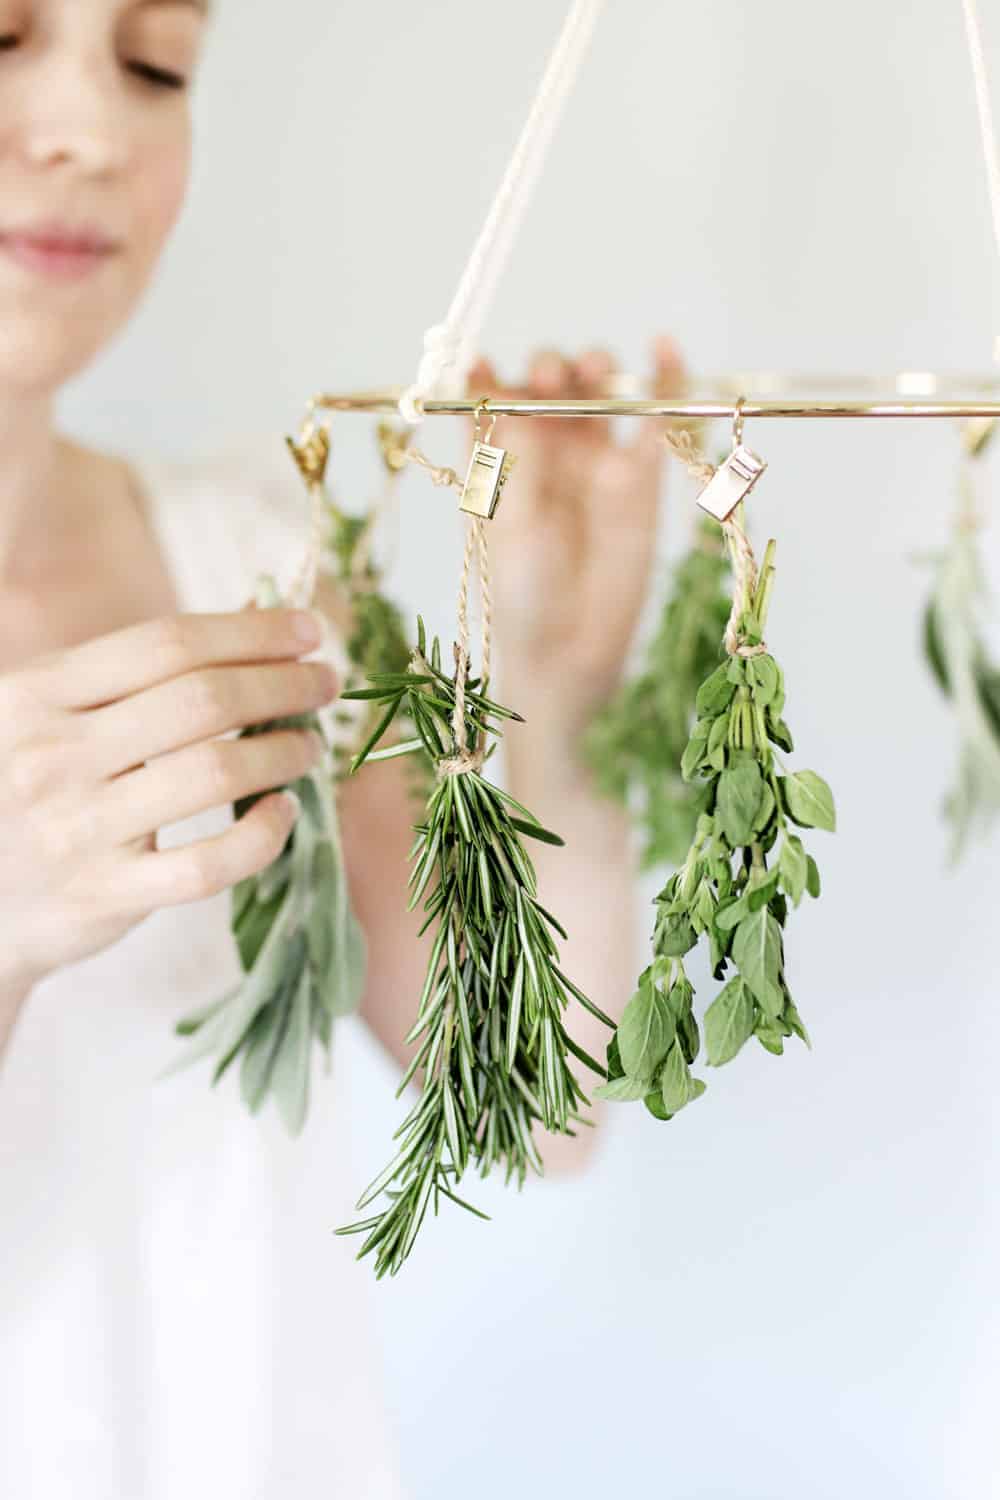 This DIY Herb Drying Rack Is the Kitchen Accessory You Didn't Know You Needed